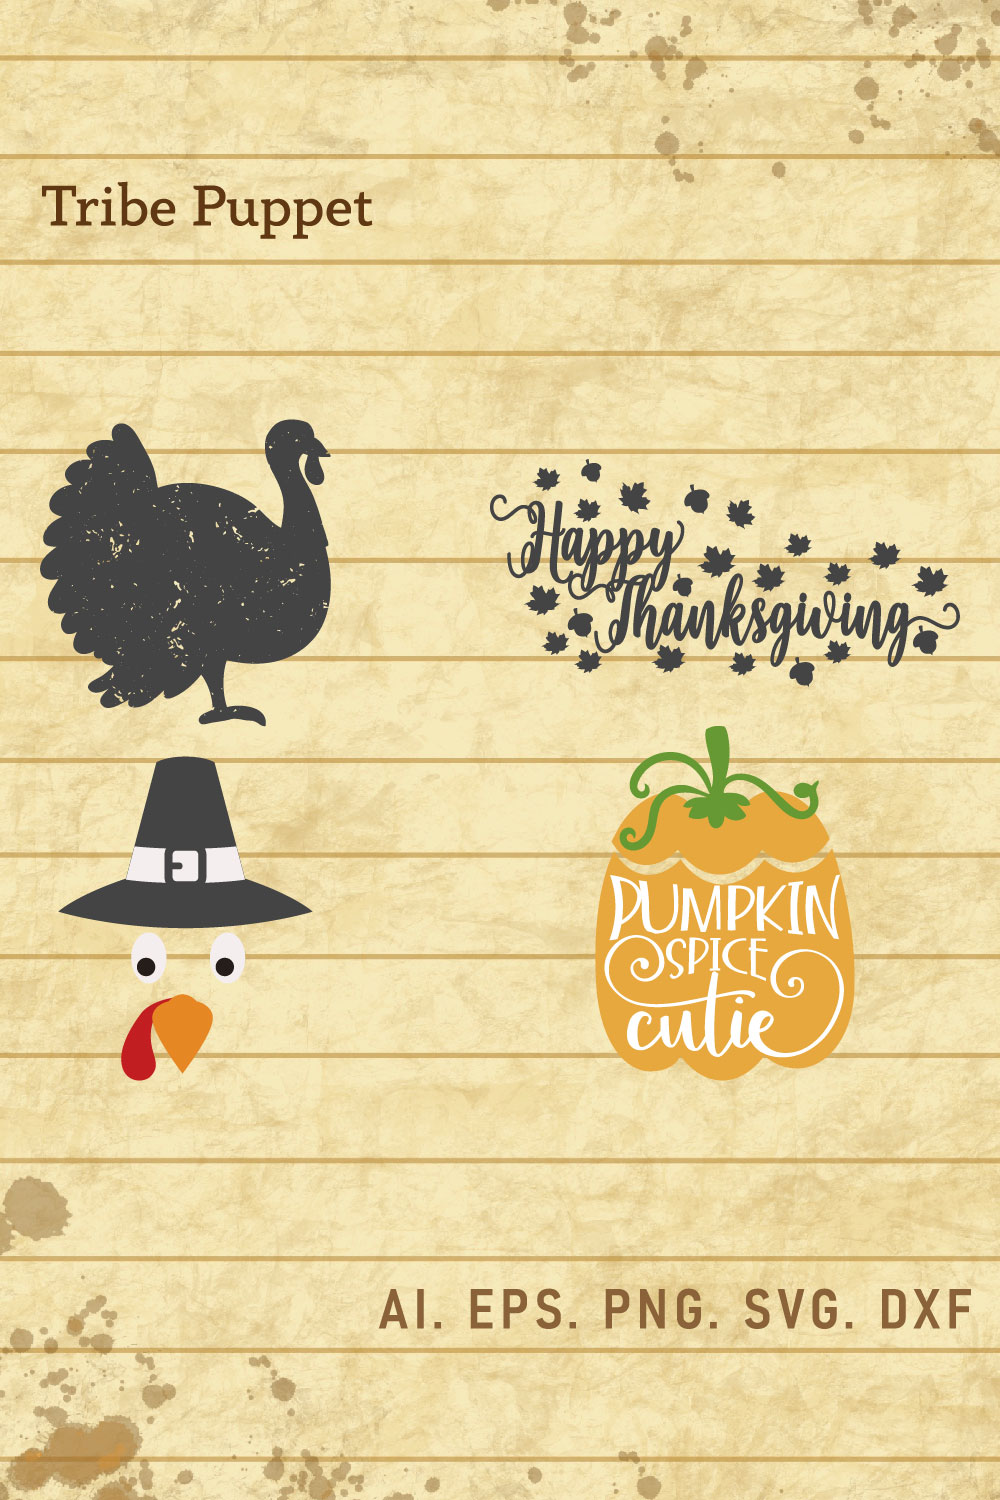 Thankxgiving Quotes 10 pinterest preview image.